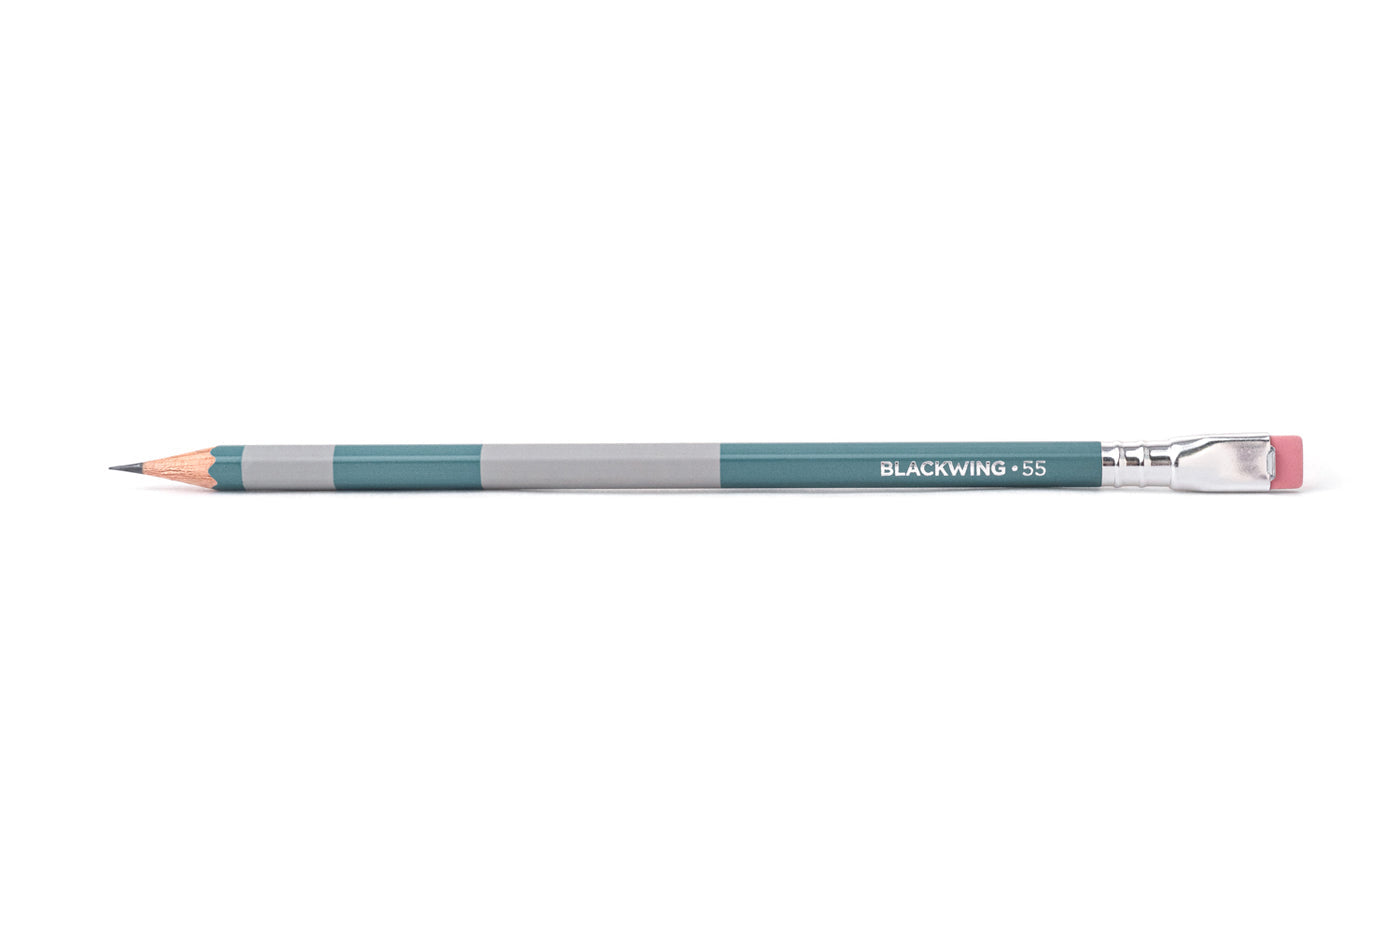 Blackwing 55 limited edition